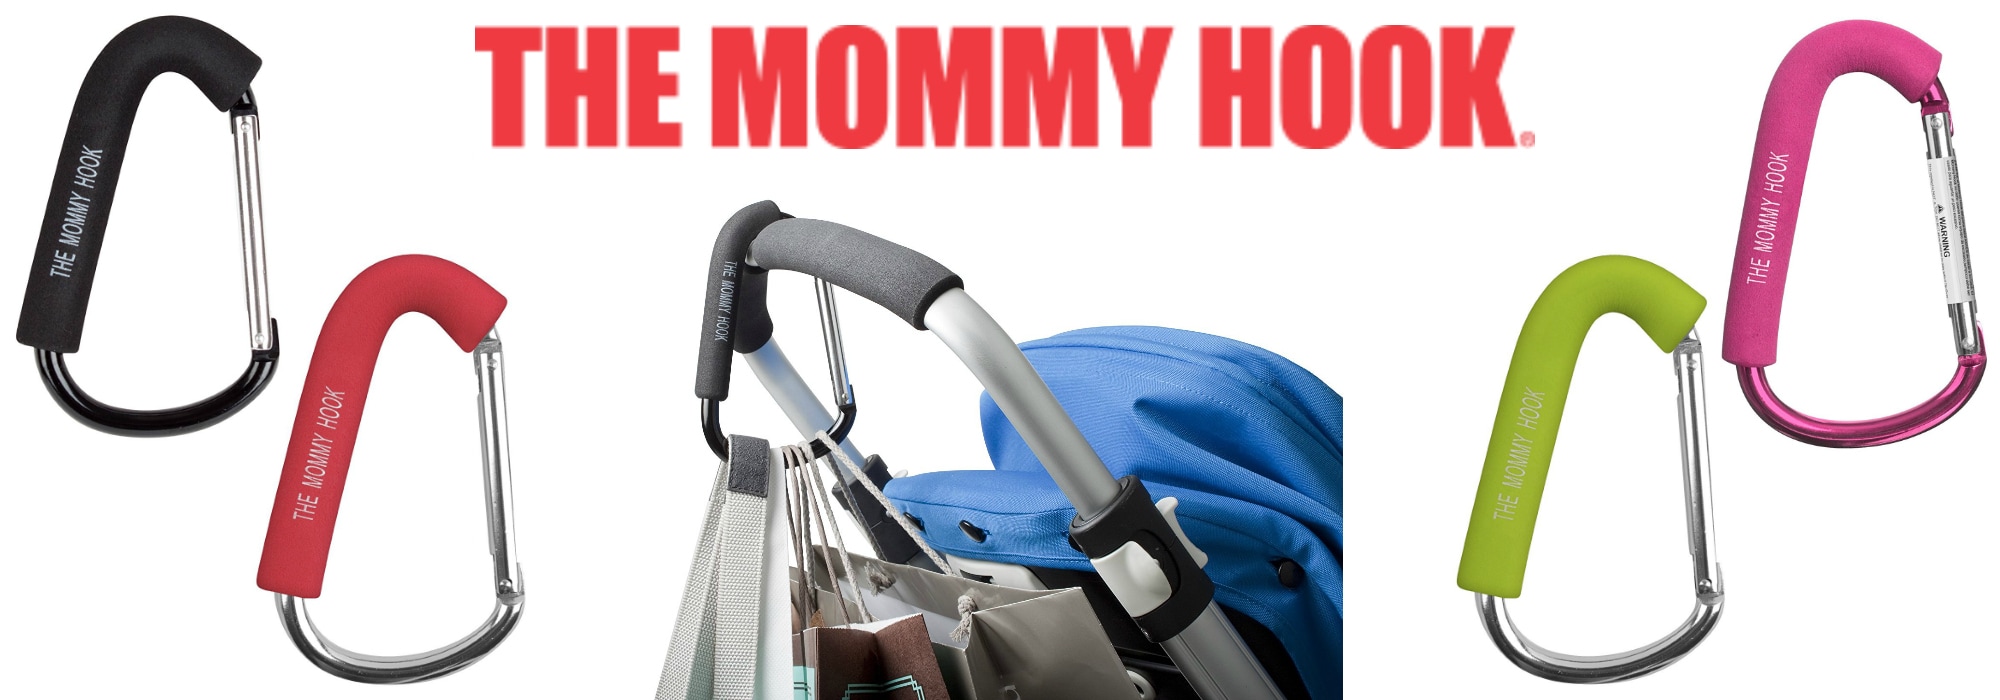 Win The Mommy Hook in US Japan Fam's $500 value 